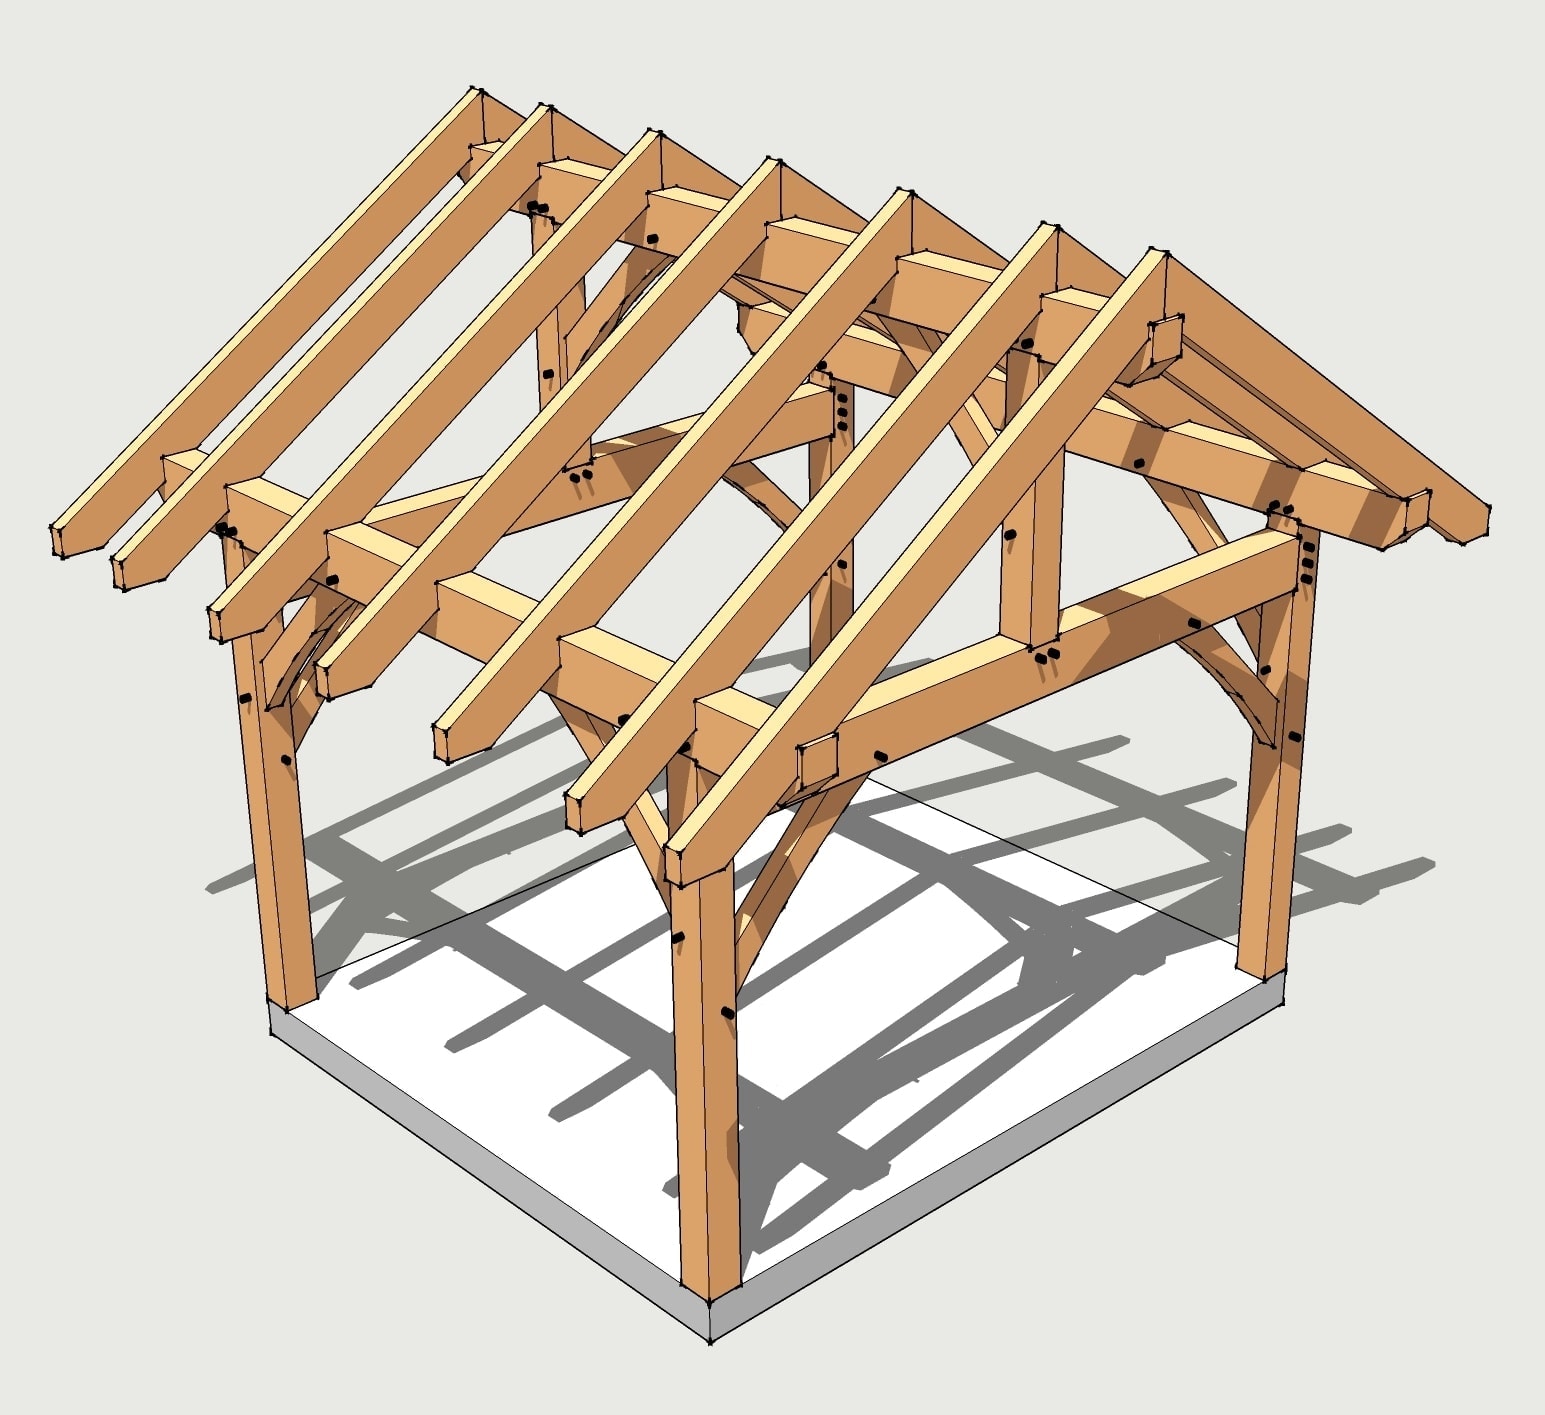 Members that are required to frame the roof. Figure 20.4 shows an 